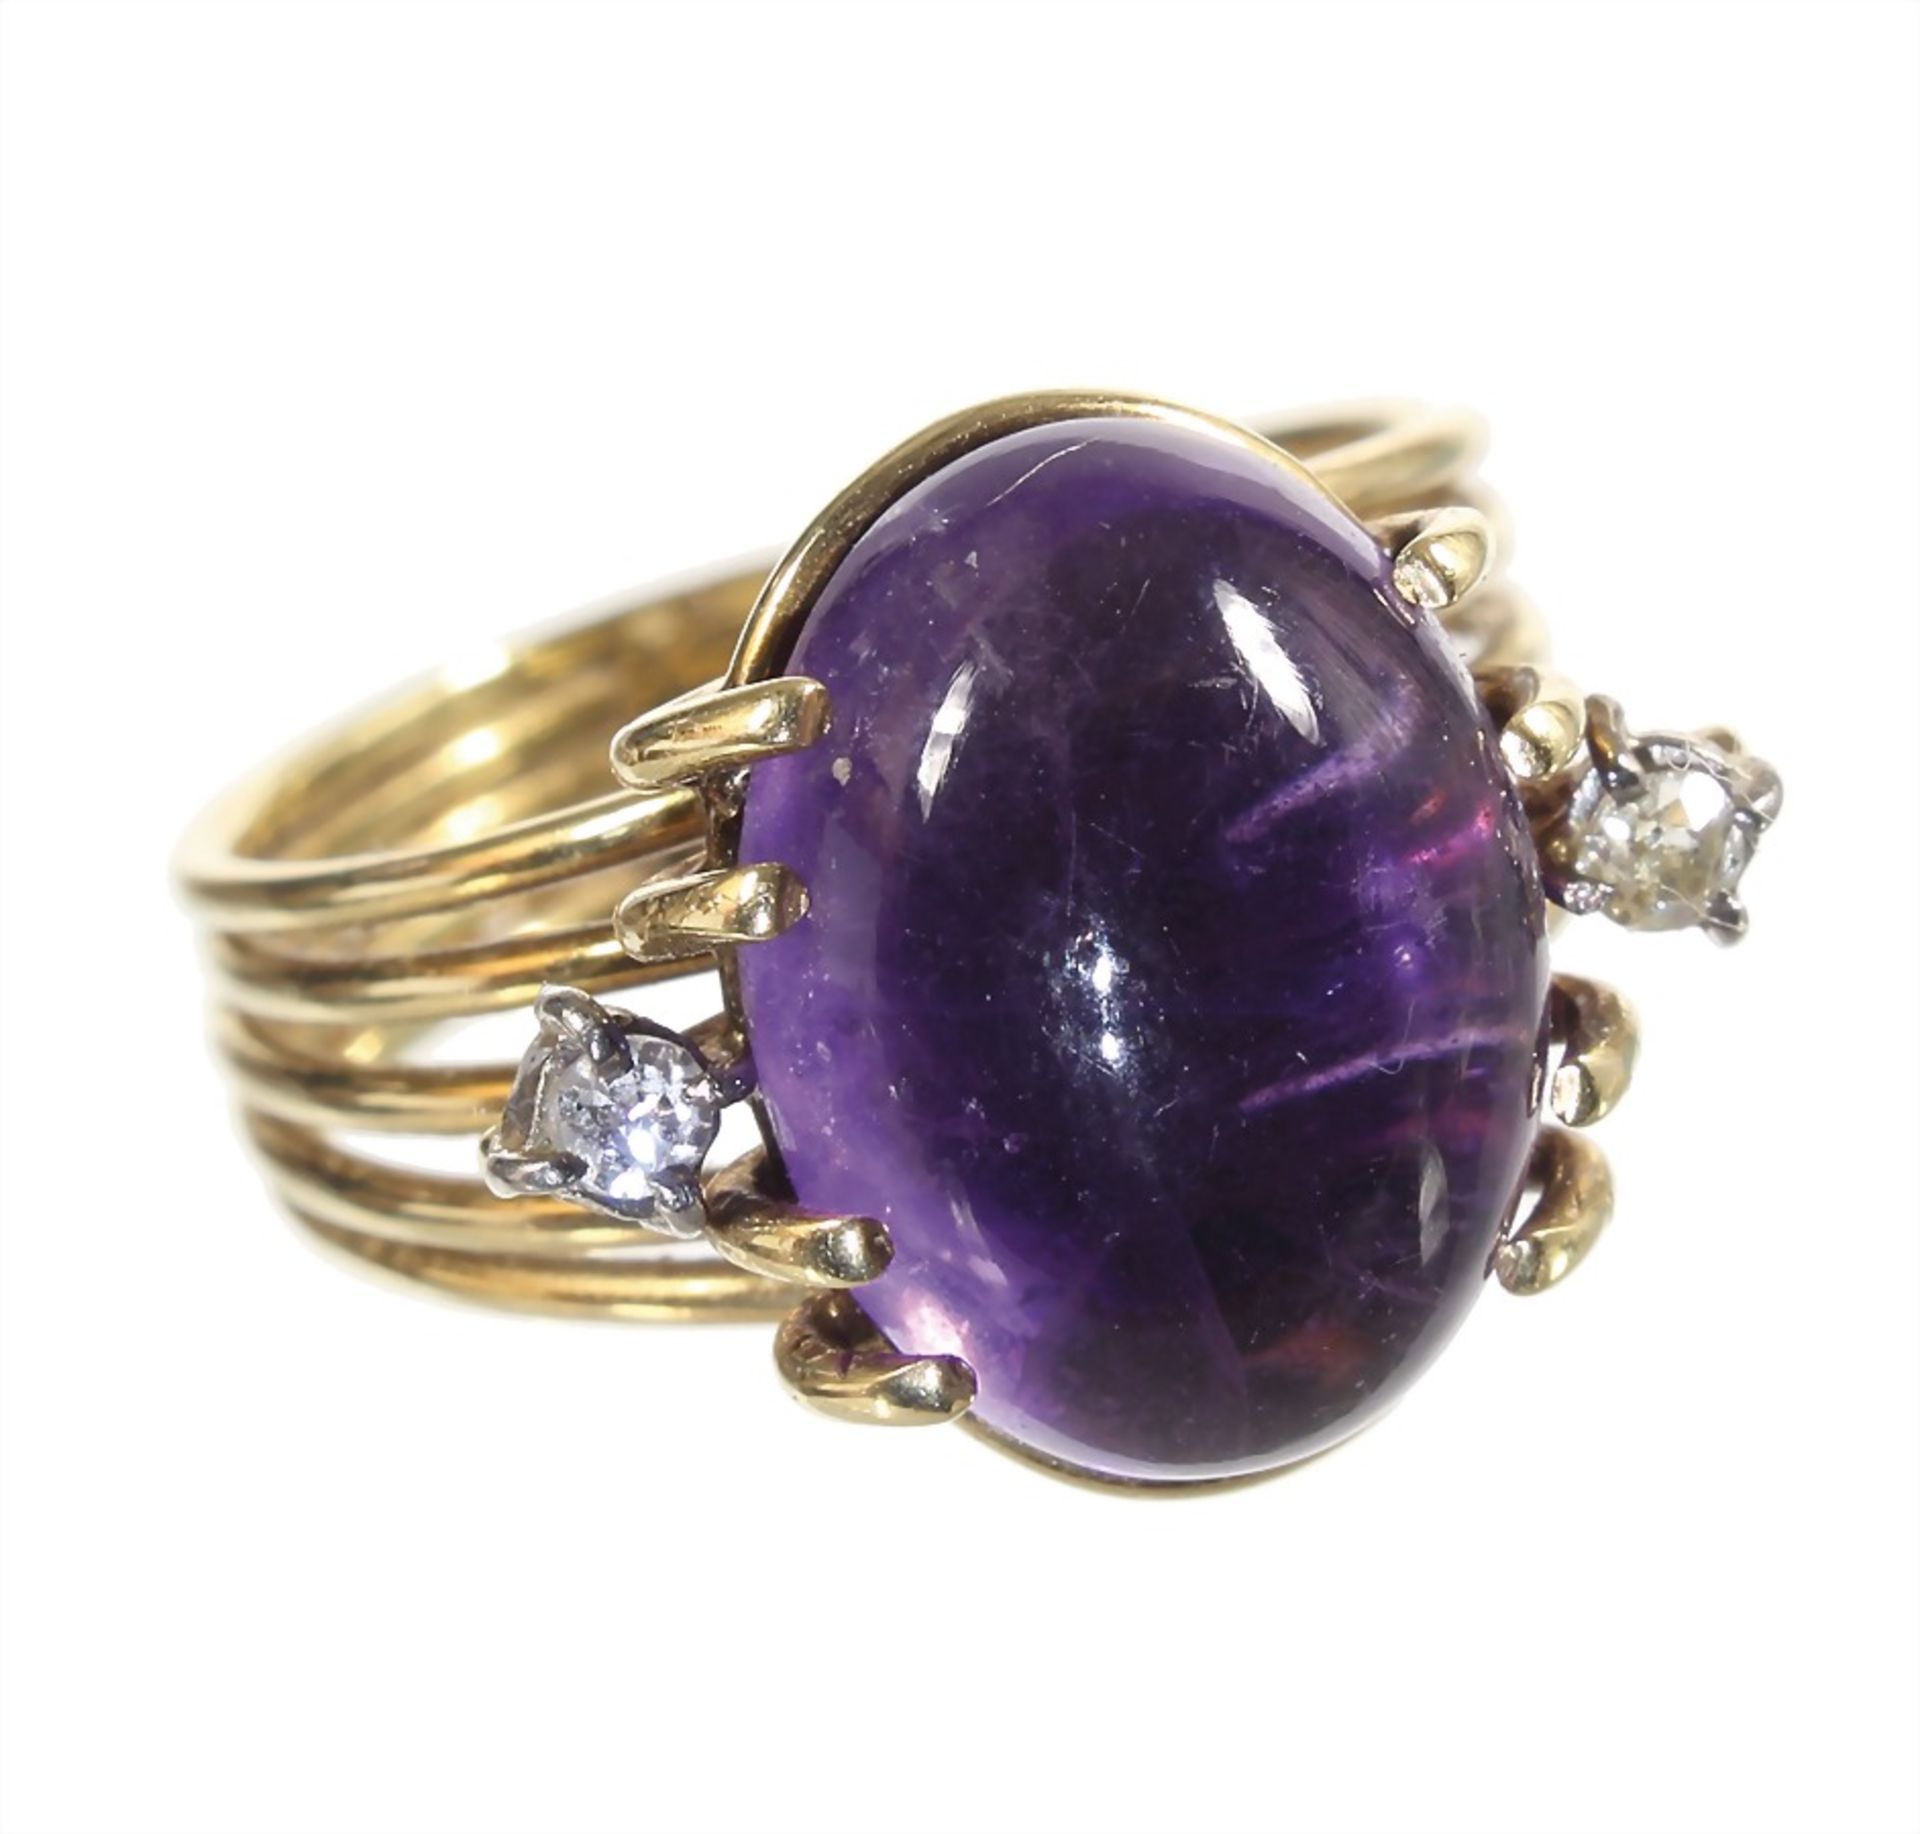 ring, yelow gold 585/000, central amethyst cabochon c. 6.5 ct, at the side 2 old cut diamonds c. 0.